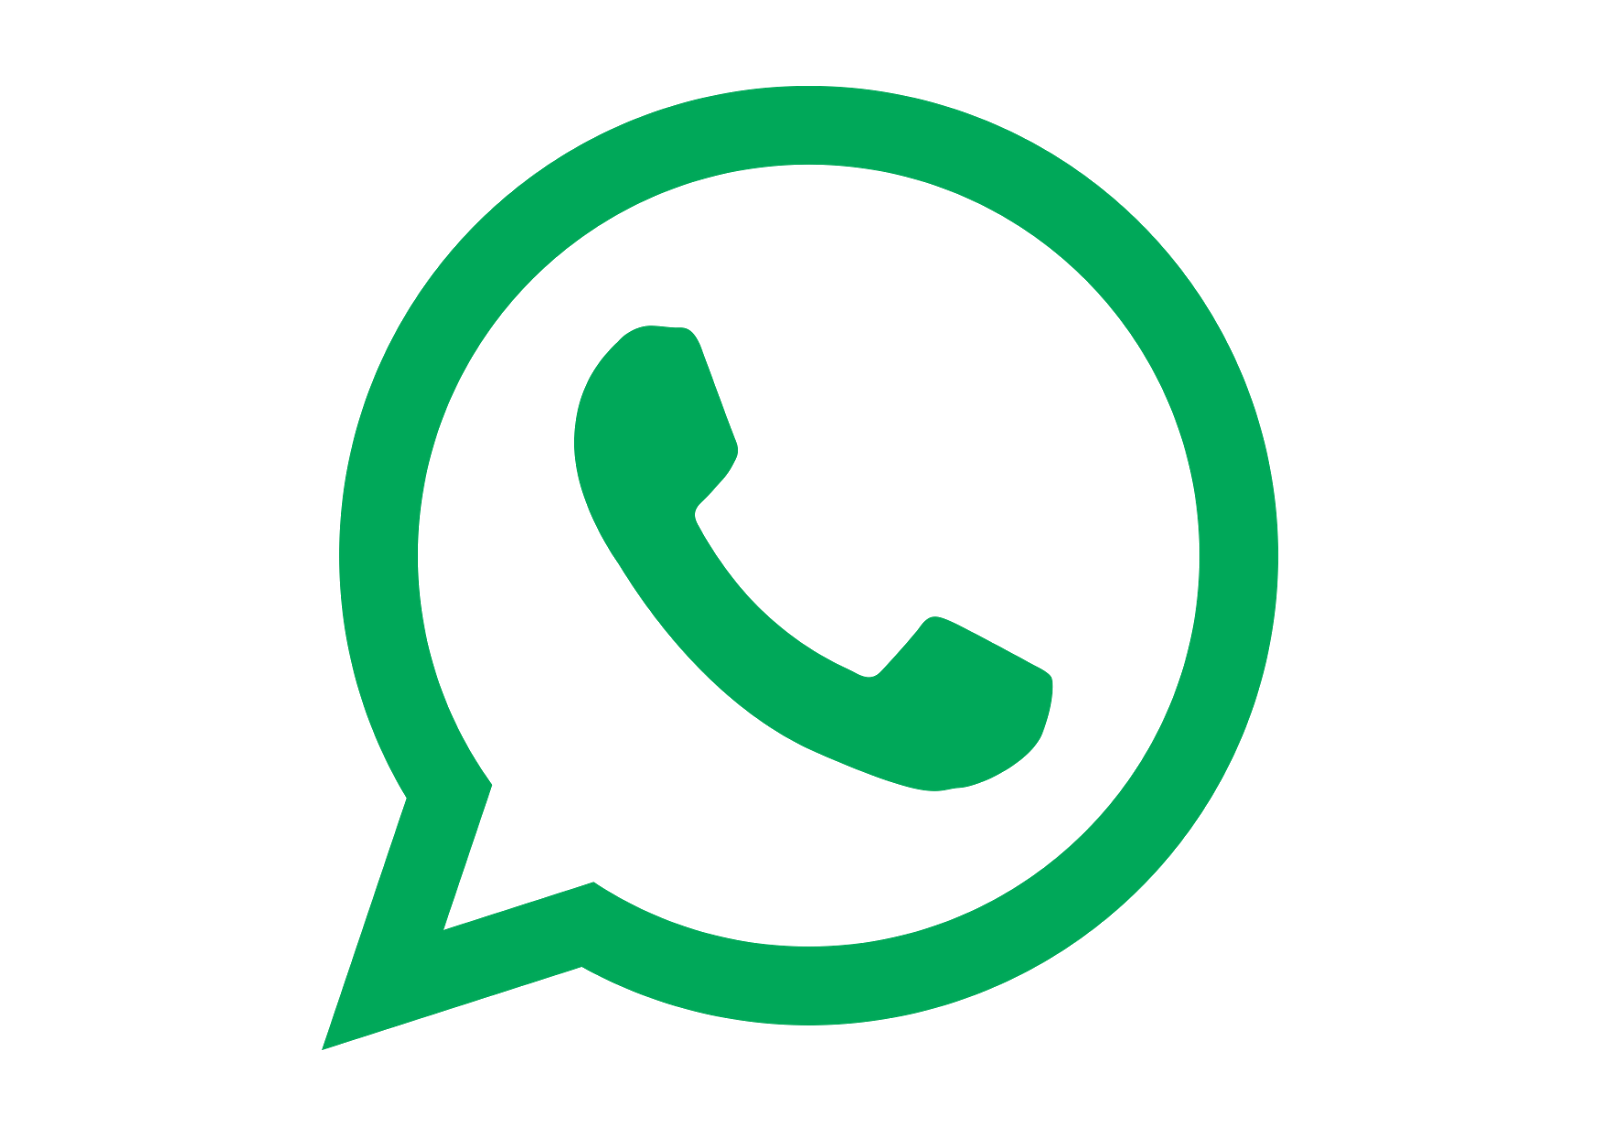 Green Transparent Logo - WhatsApp Logo PNG Images Free DOWNLOAD | By Freepnglogos.com